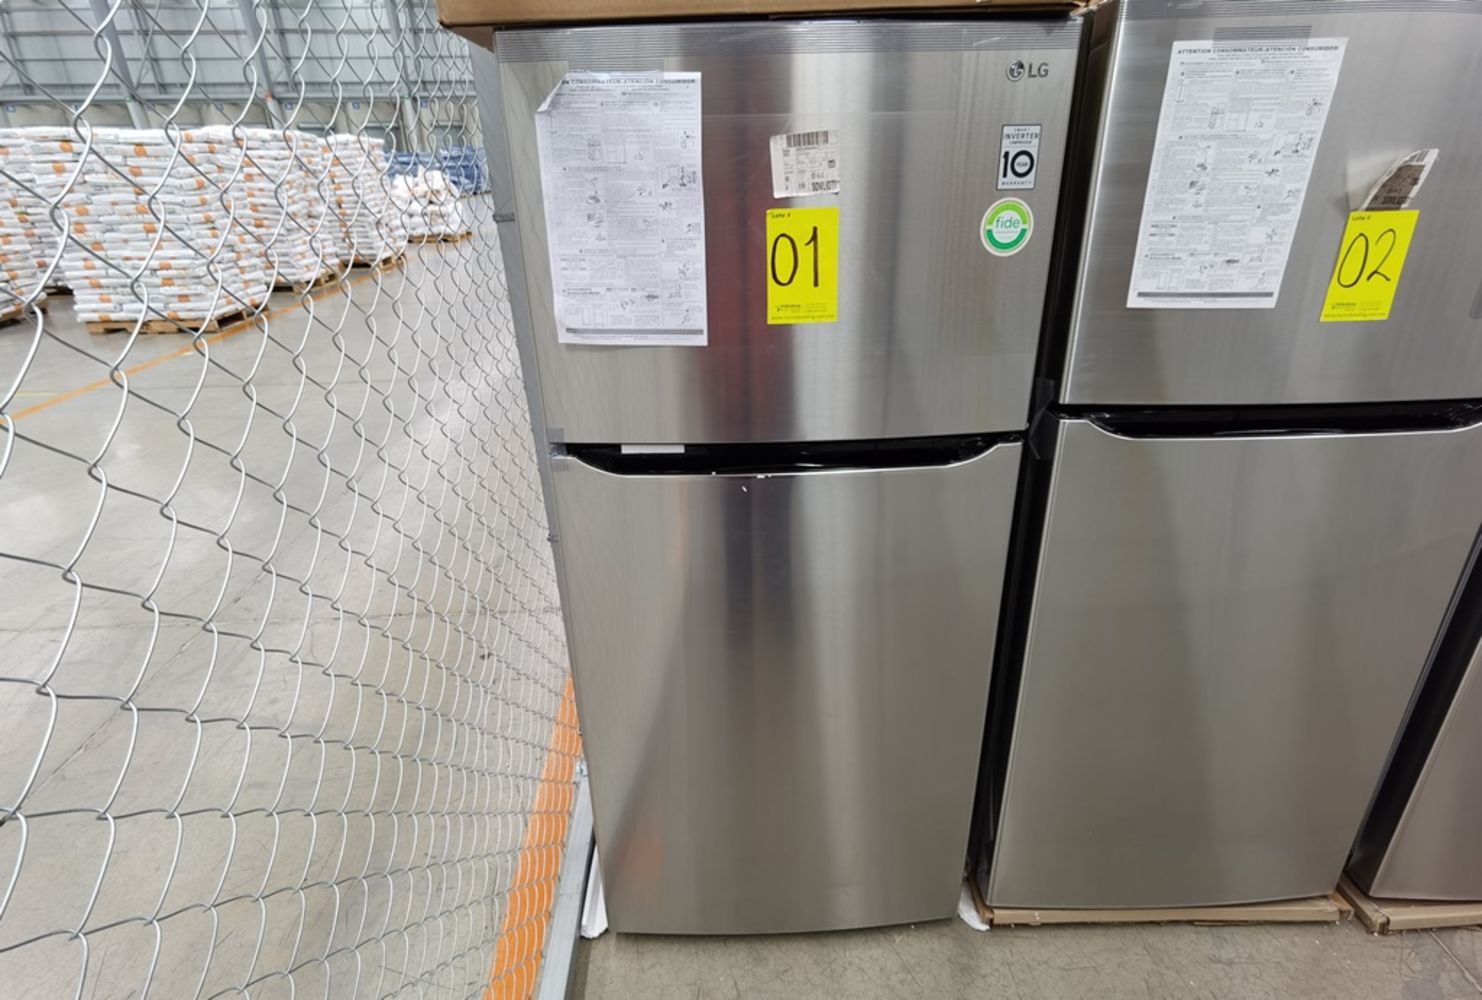 Walmart and Ecommerce New Equipment Auction- Refrigerators, Freezers, Cooktops, Ovens, Stovetops, Furniture, Mattresses, Washer & Dryers